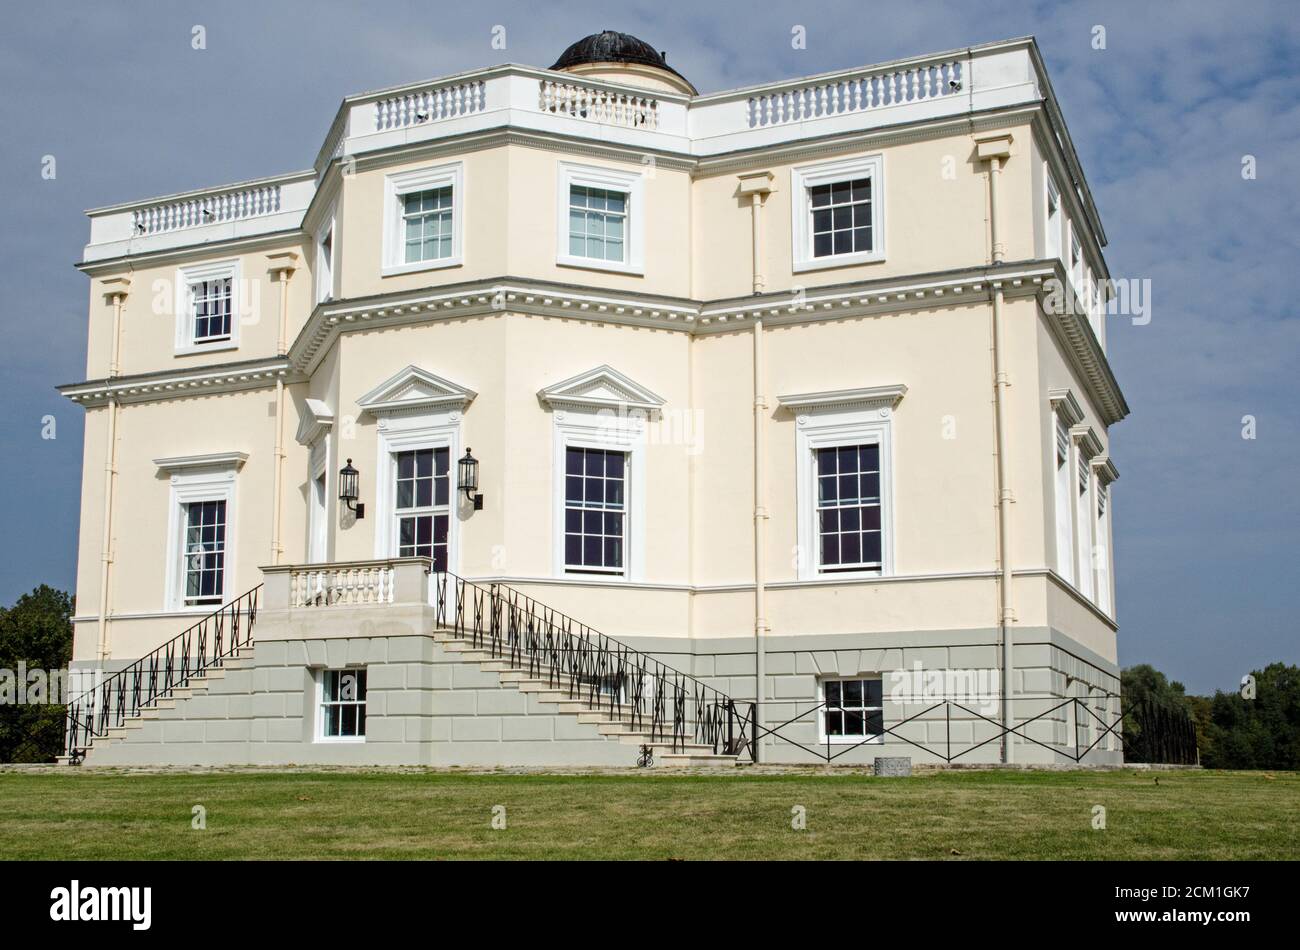 Exterior facade of the historic King's Observatory in the middle of Old Deer Park in Richmond Upon Thames, West London.  Built for King George III to Stock Photo